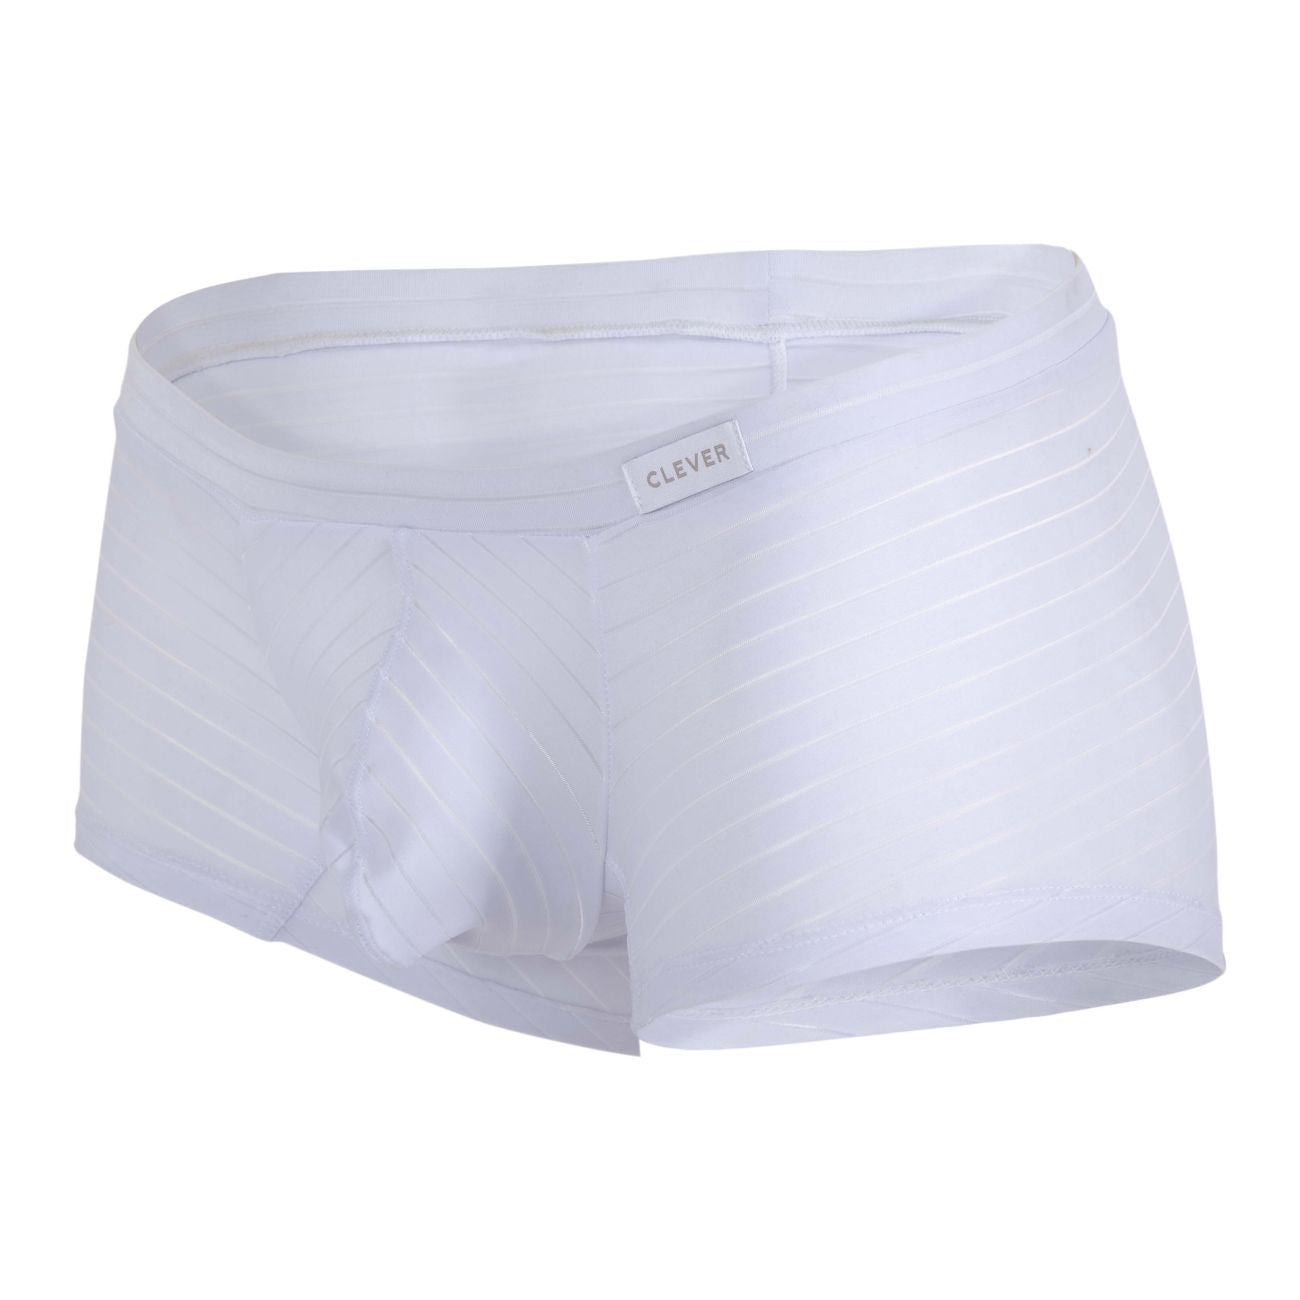 Clever 1448 Sainted Trunks White